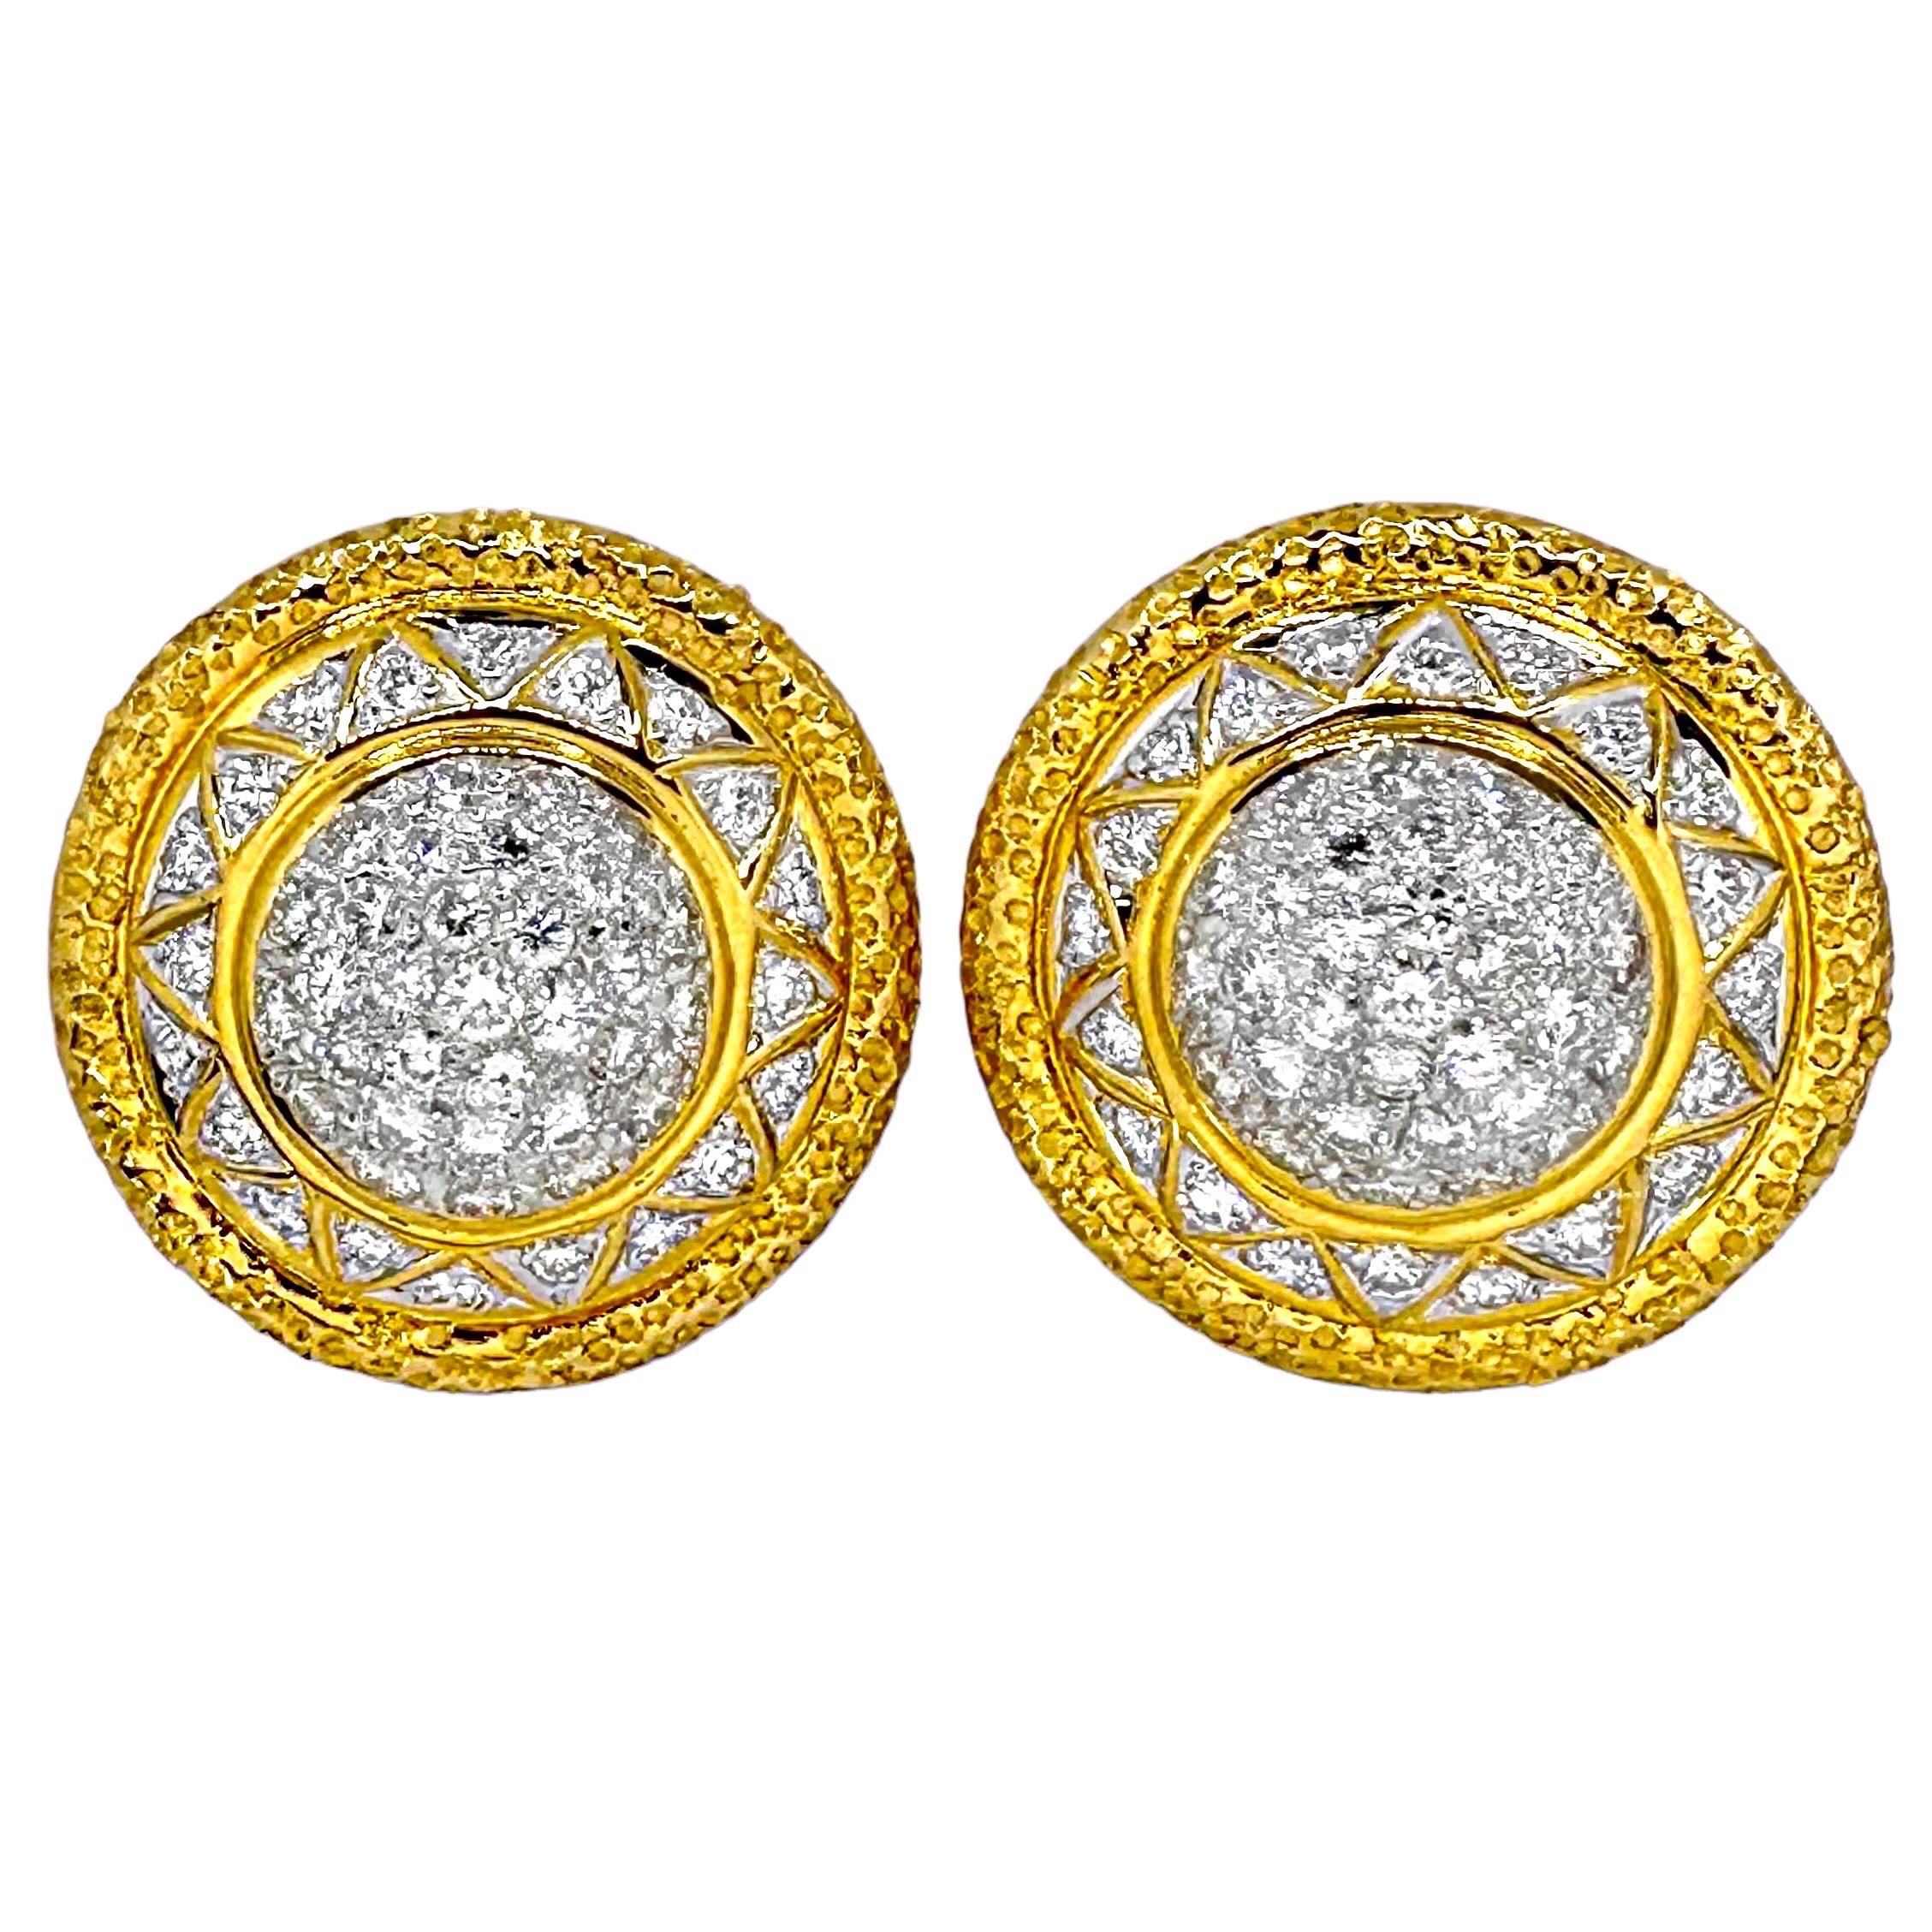 These finely crafted 18K yellow gold dome earrings have diamond encrusted centers surrounded by high polish gold accents and hammered gold edges. This pair would be a delightful addition to any lady's jewelry collection.  Total diamond weight is